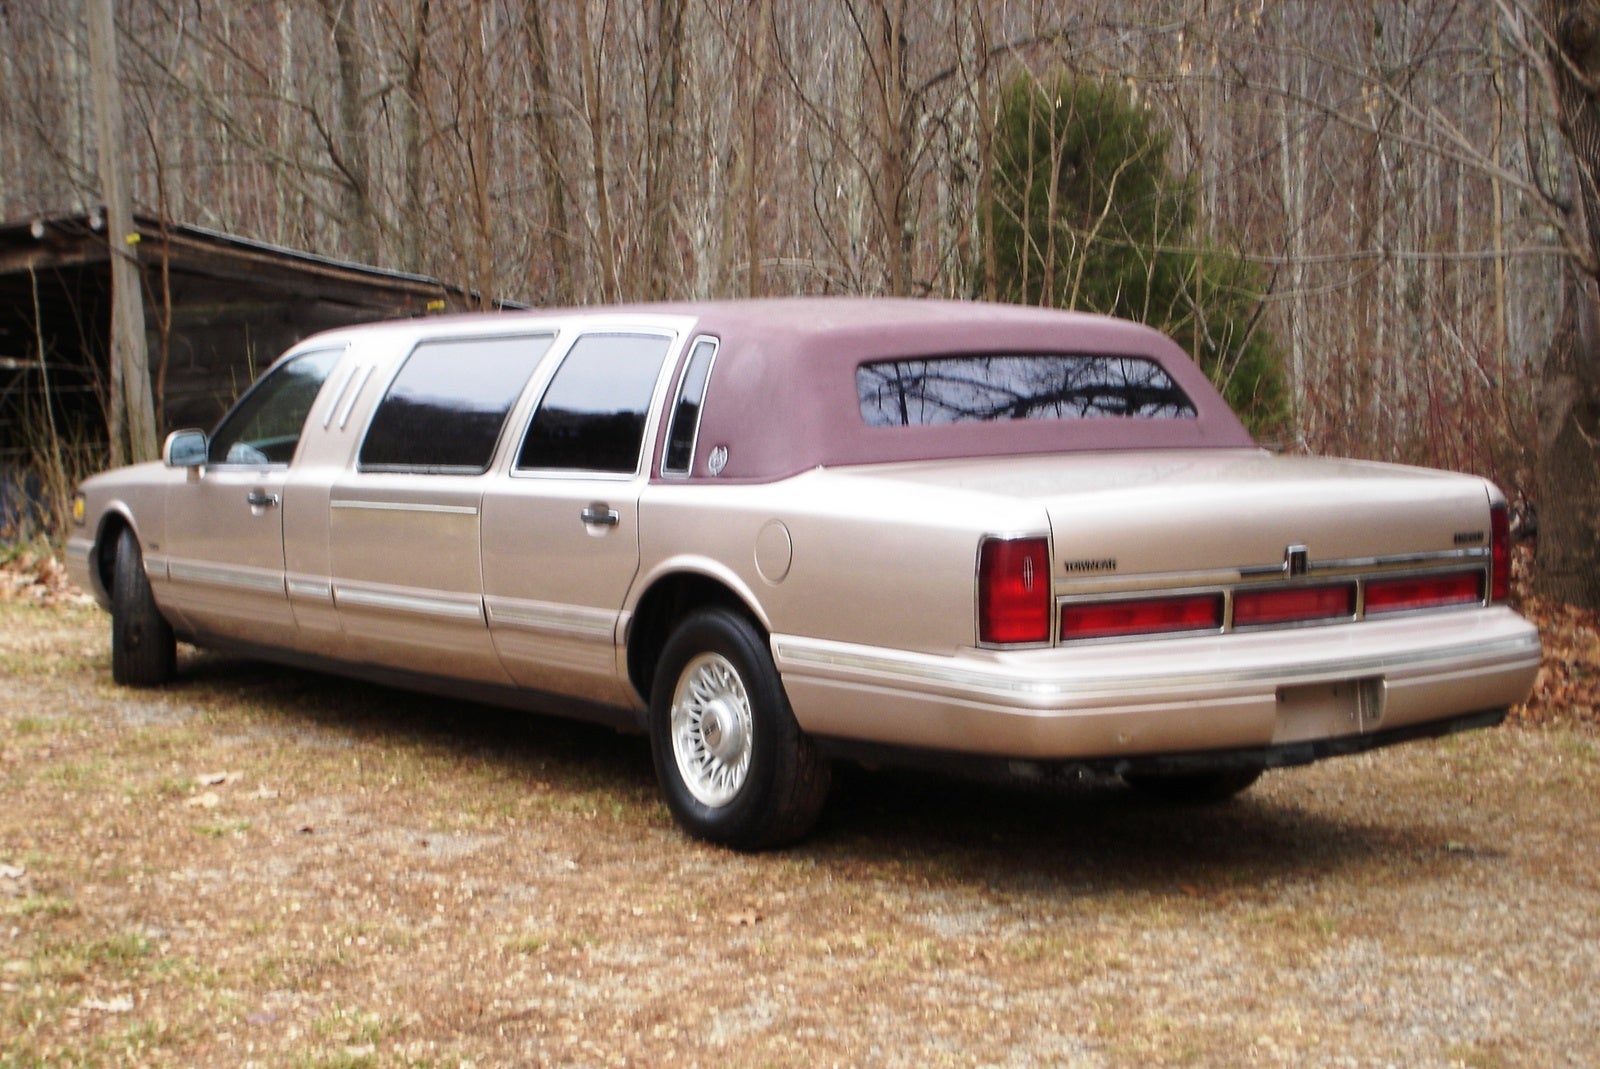 1996 Ford lincoln #10.